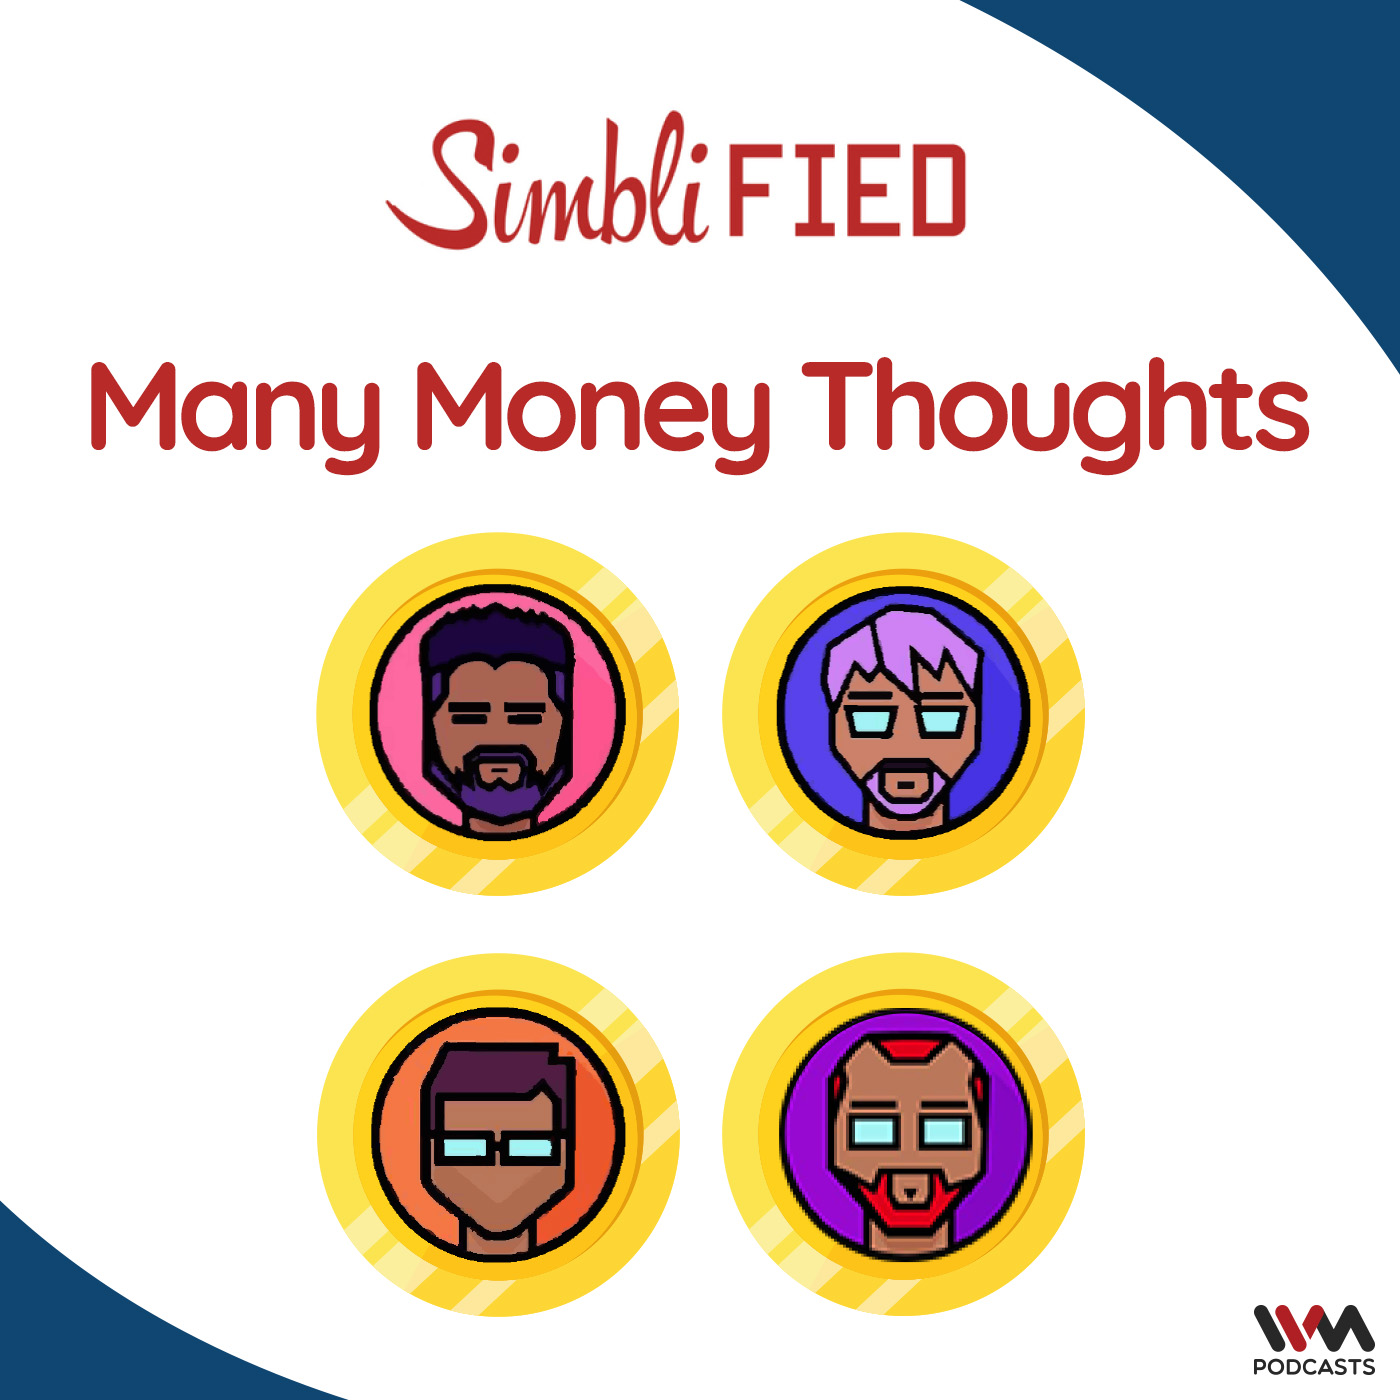 Many money thoughts